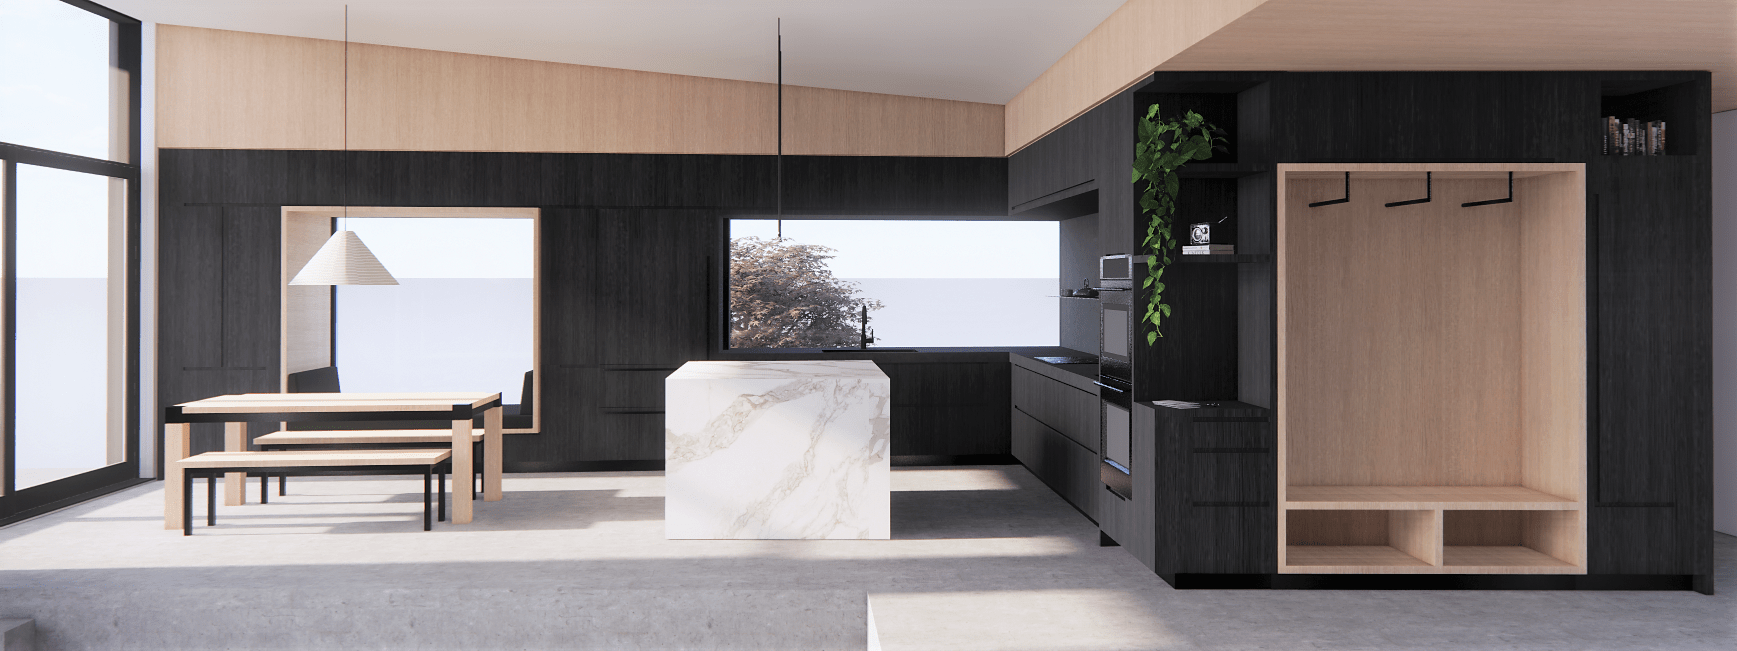 Kitchen and dining area with waterfall quartz slab island, creative thoughtful details